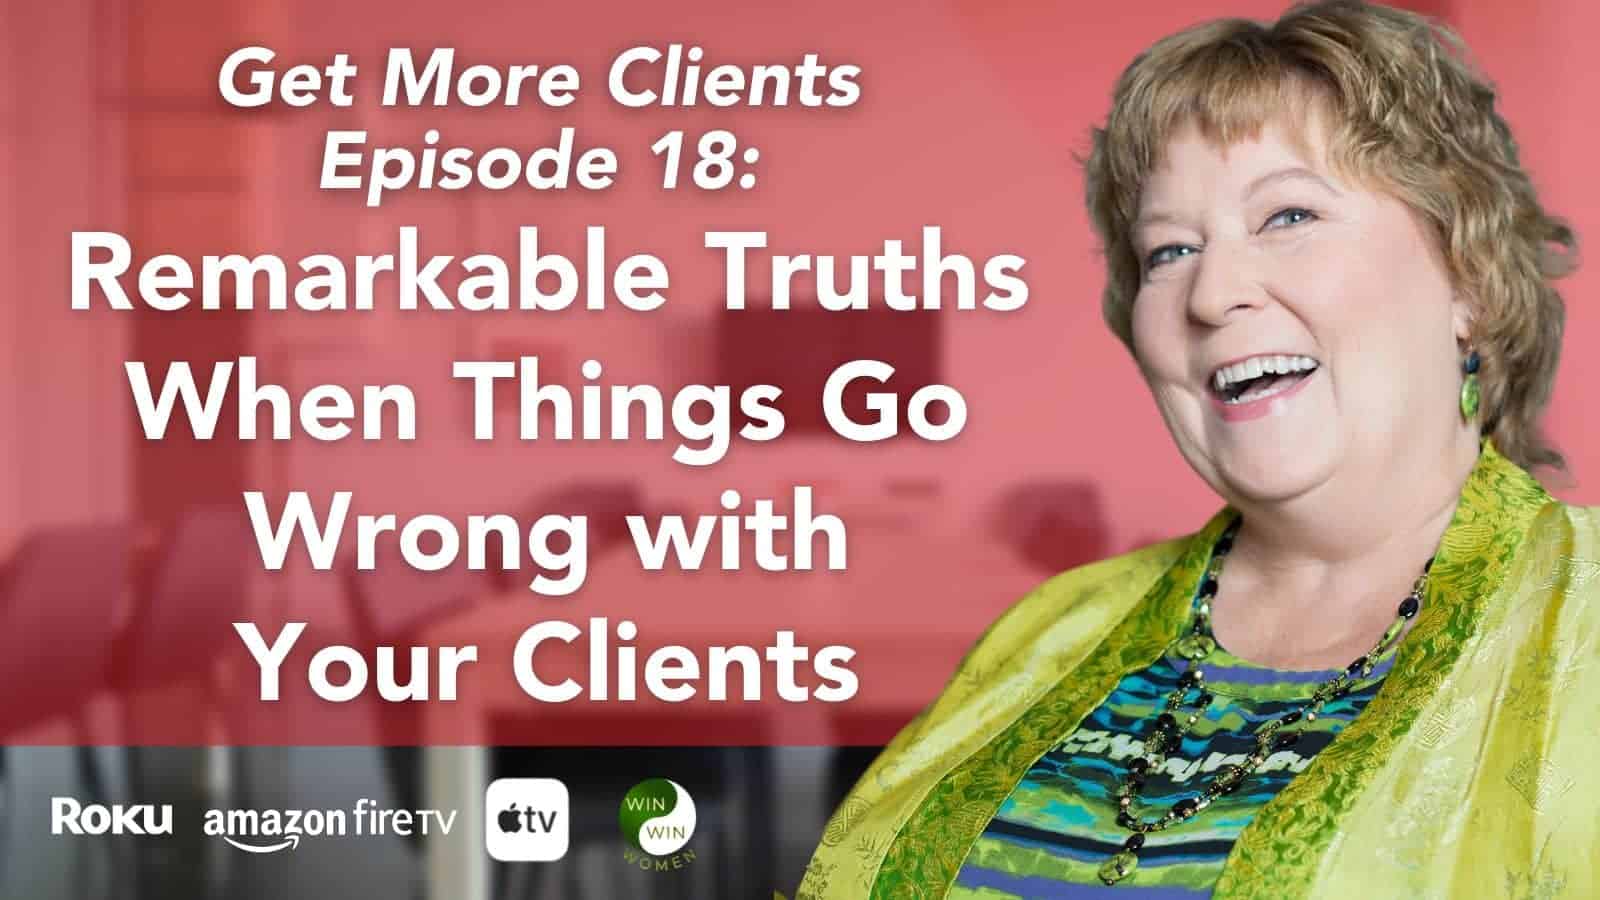 Remarkable Truths When Things Go Wrong with Your Clients